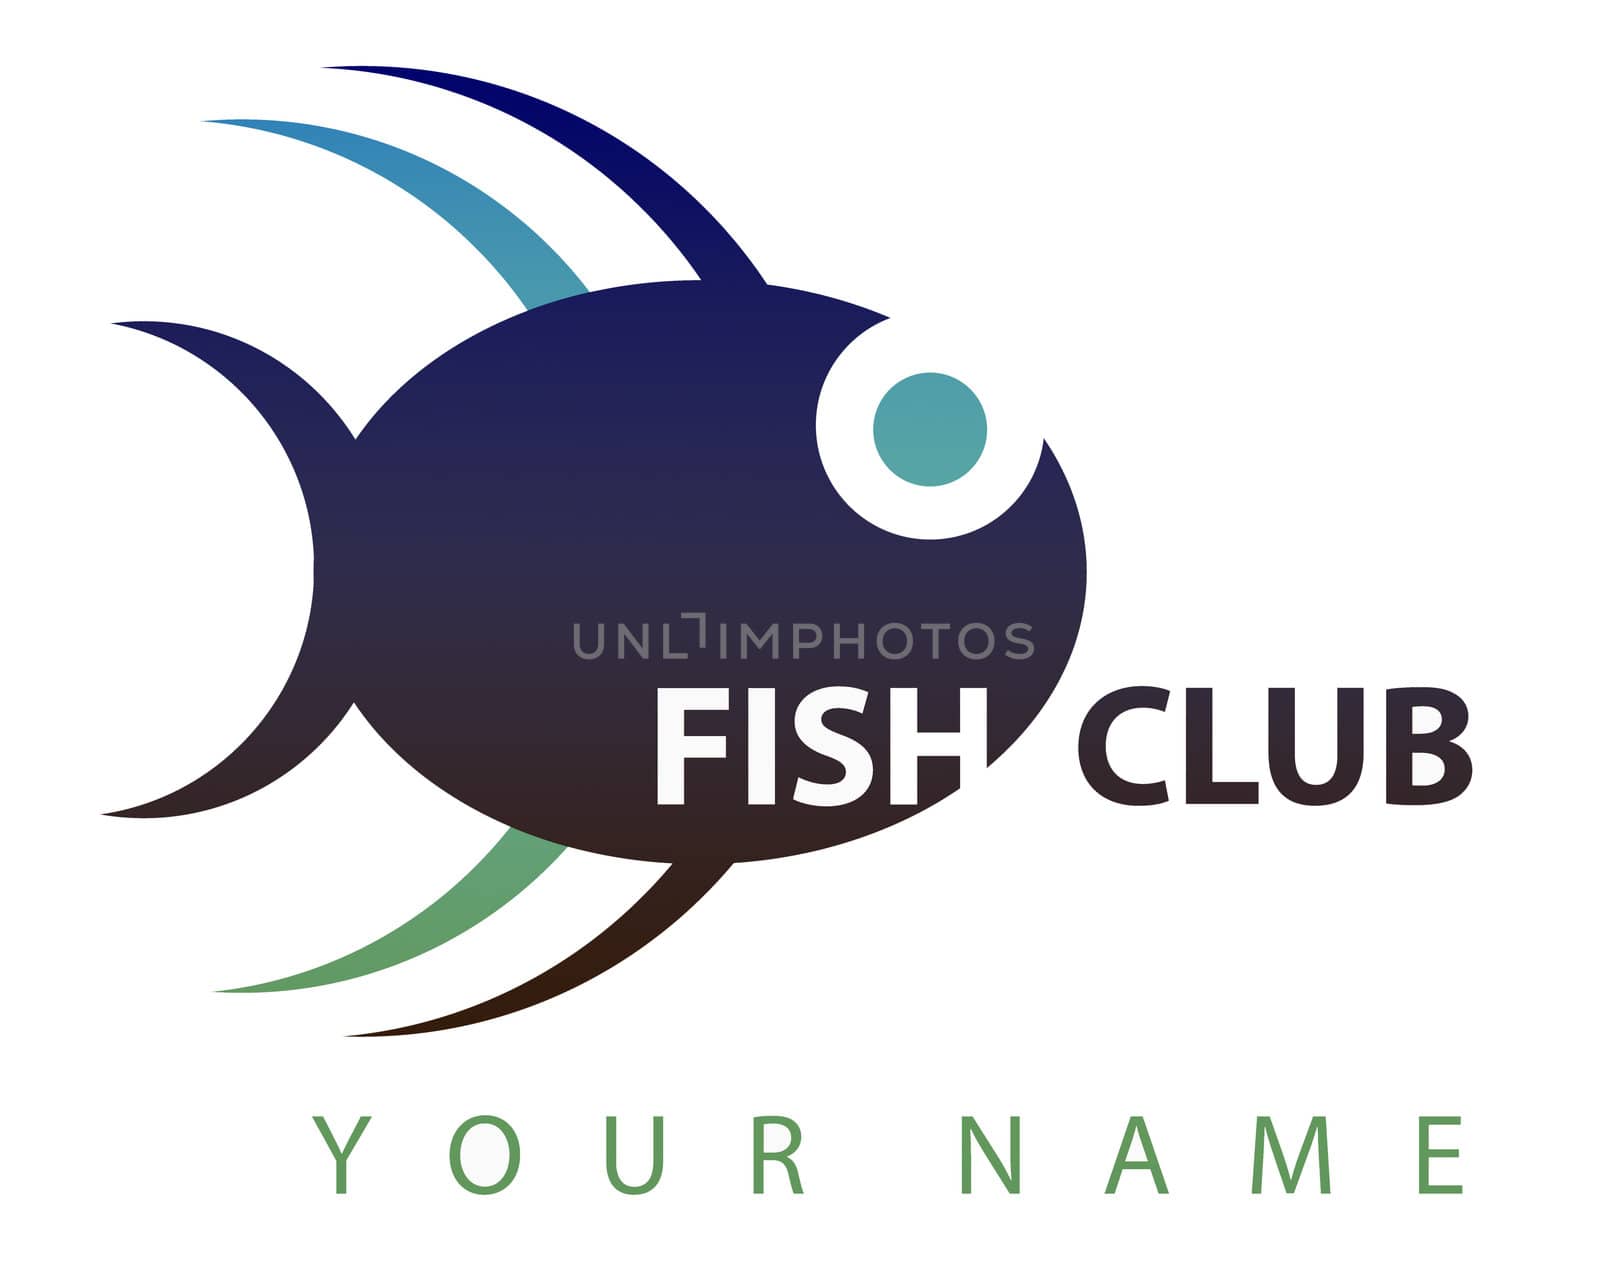 A logo suitable for a fish club: a nice blu fish